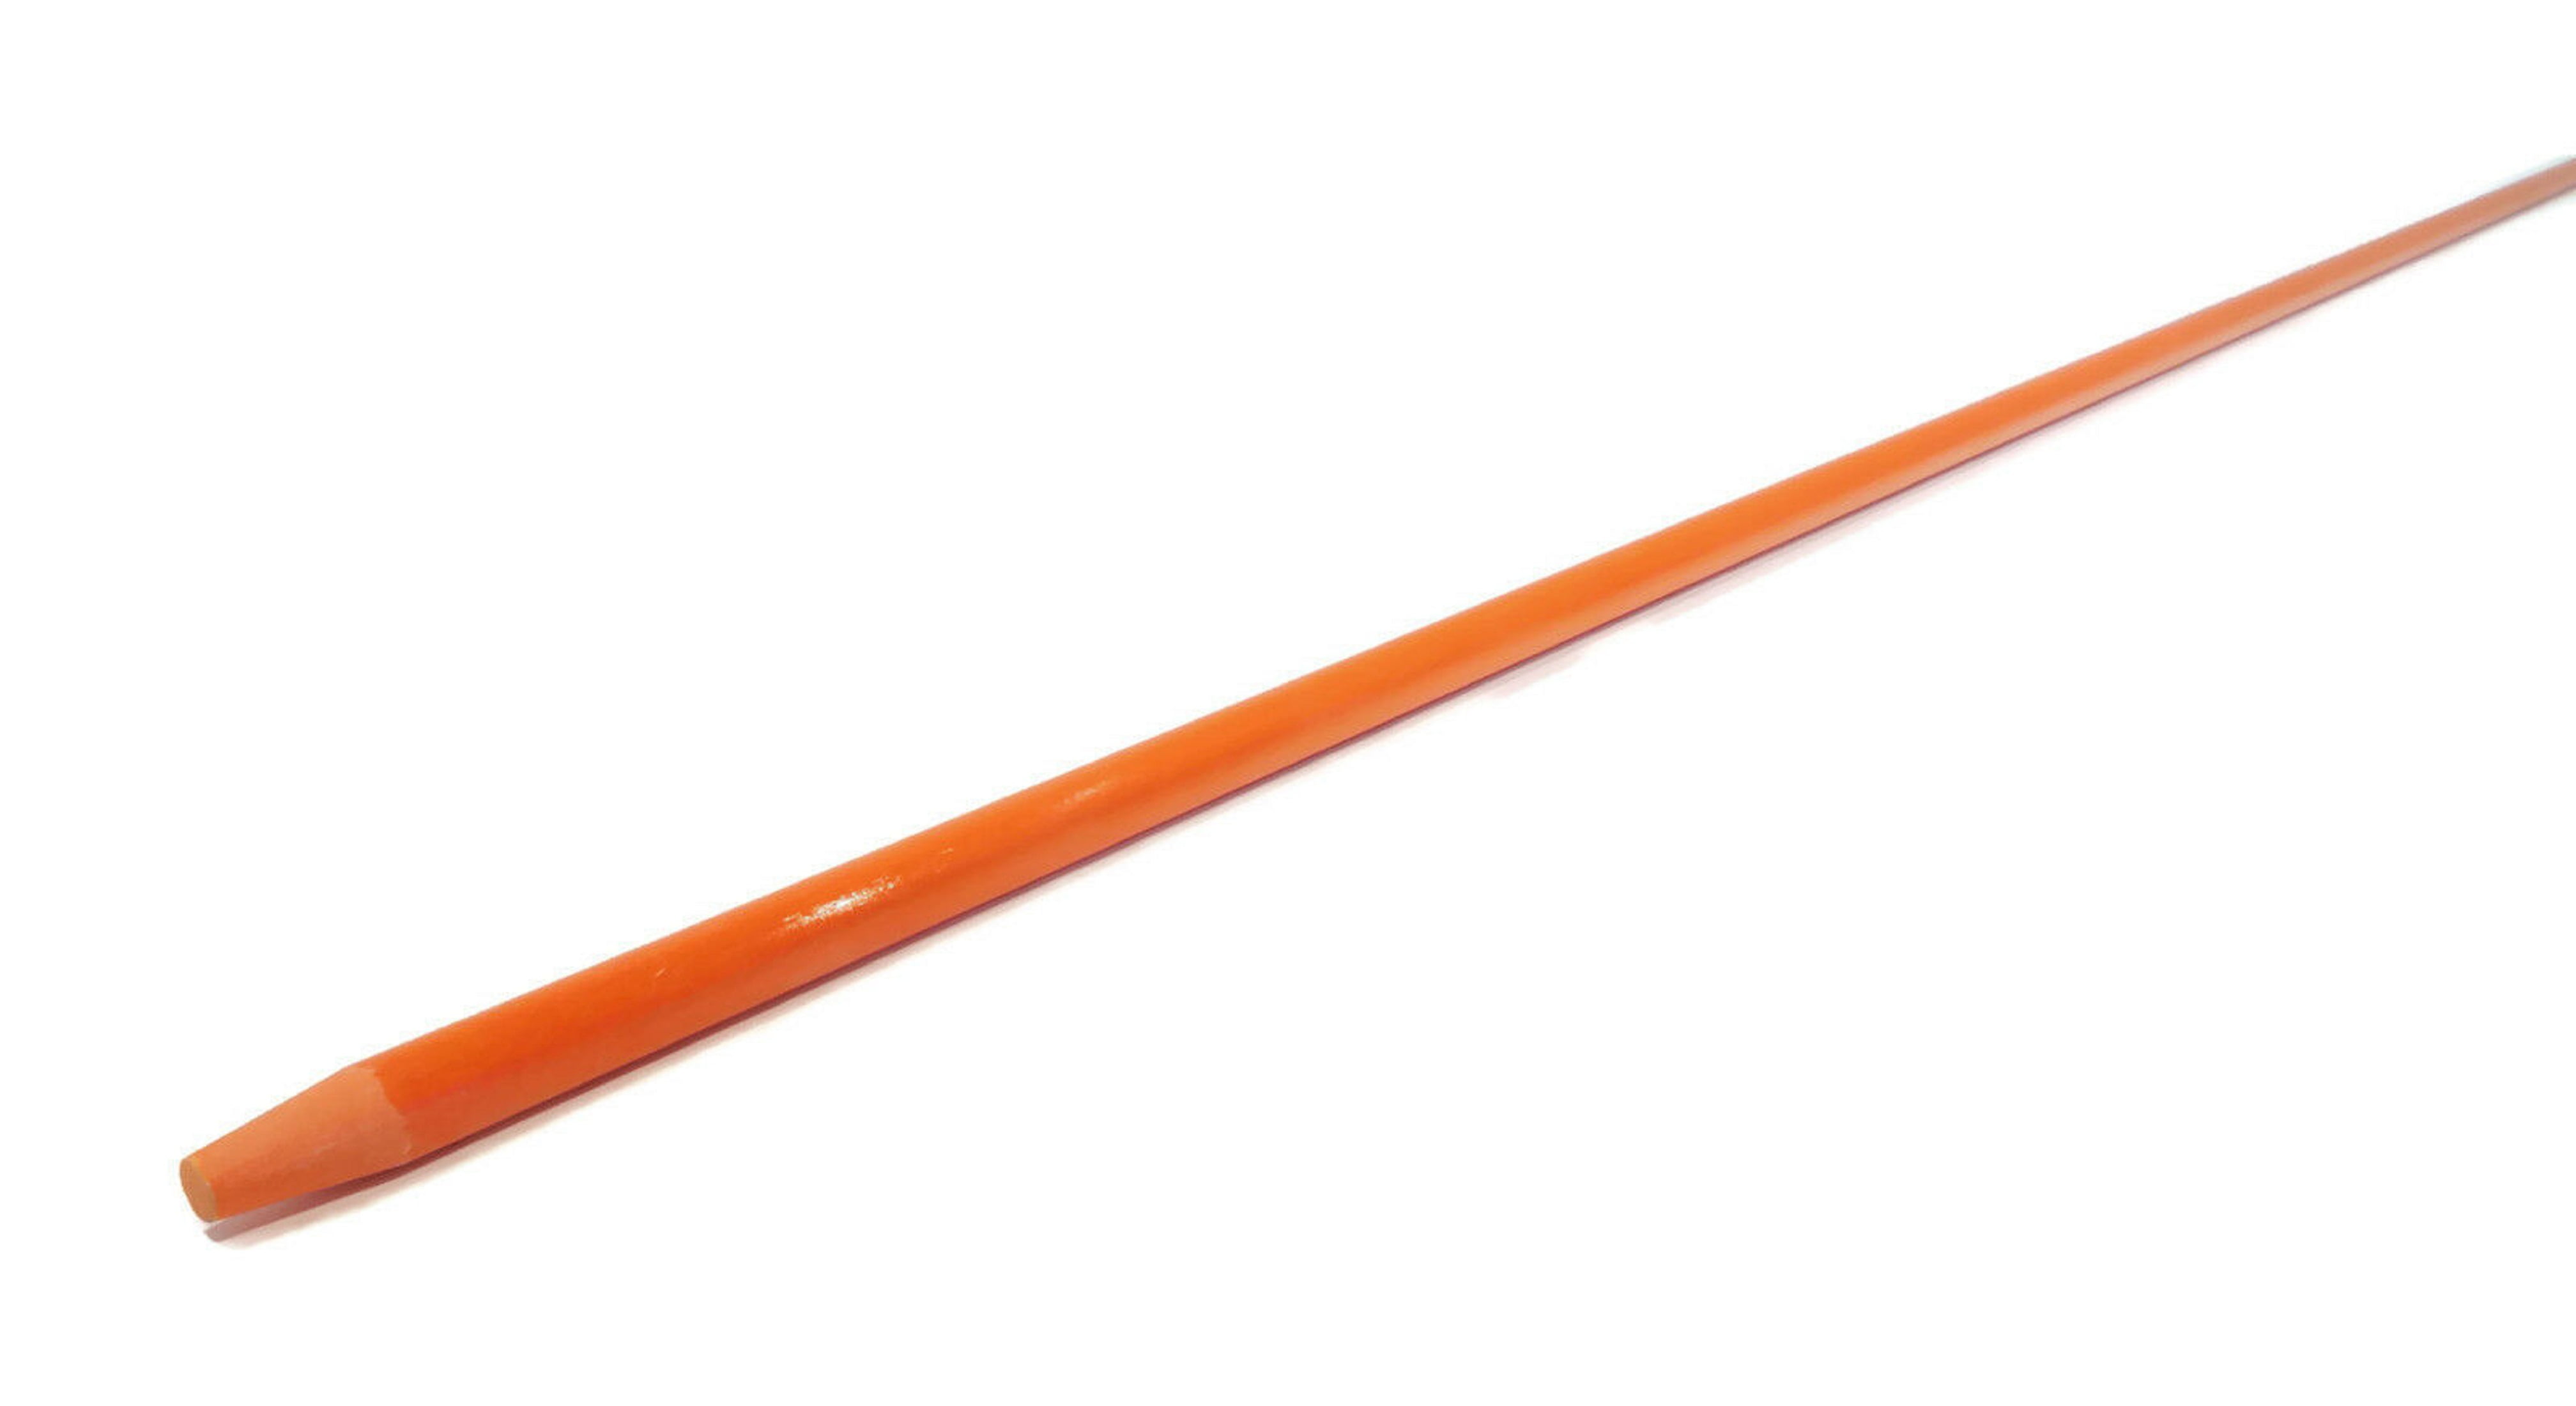 Autoparts Snow Plow Stakes 48 Inch Long Driveway Markers Plow Stake Orange Fiberglass Stakes for Driveway 1/4 Thick Driveway Markers Pack of 200 